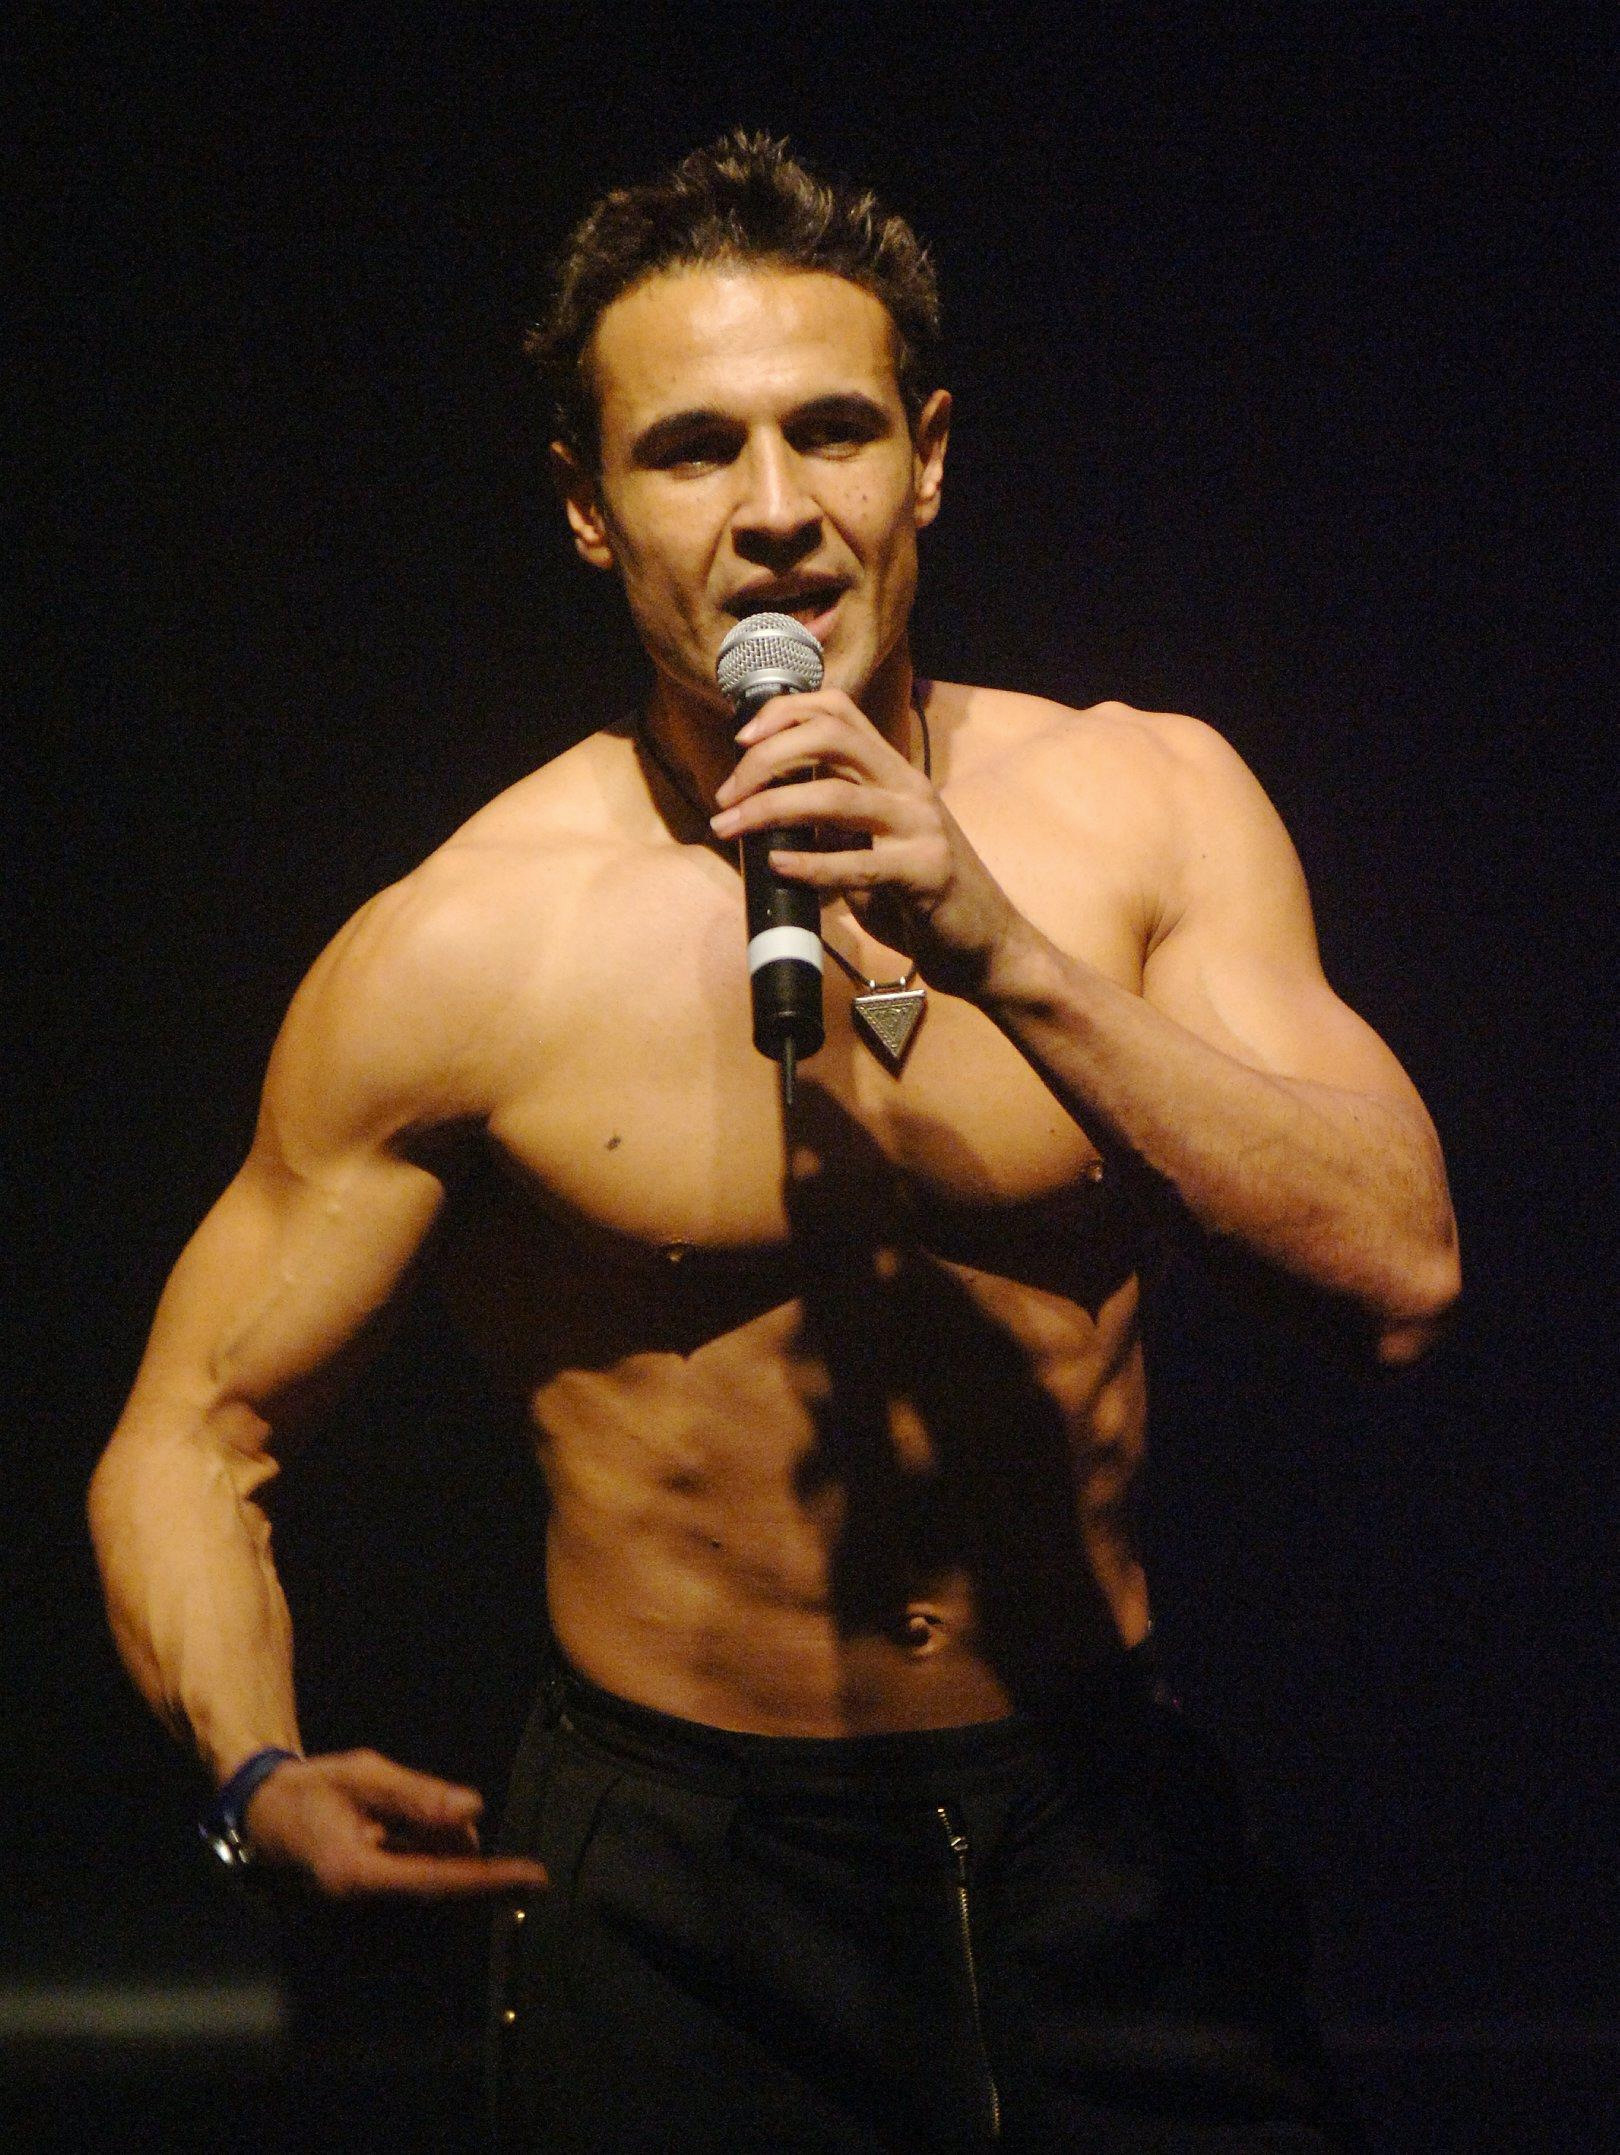 Chico performing in 2005 